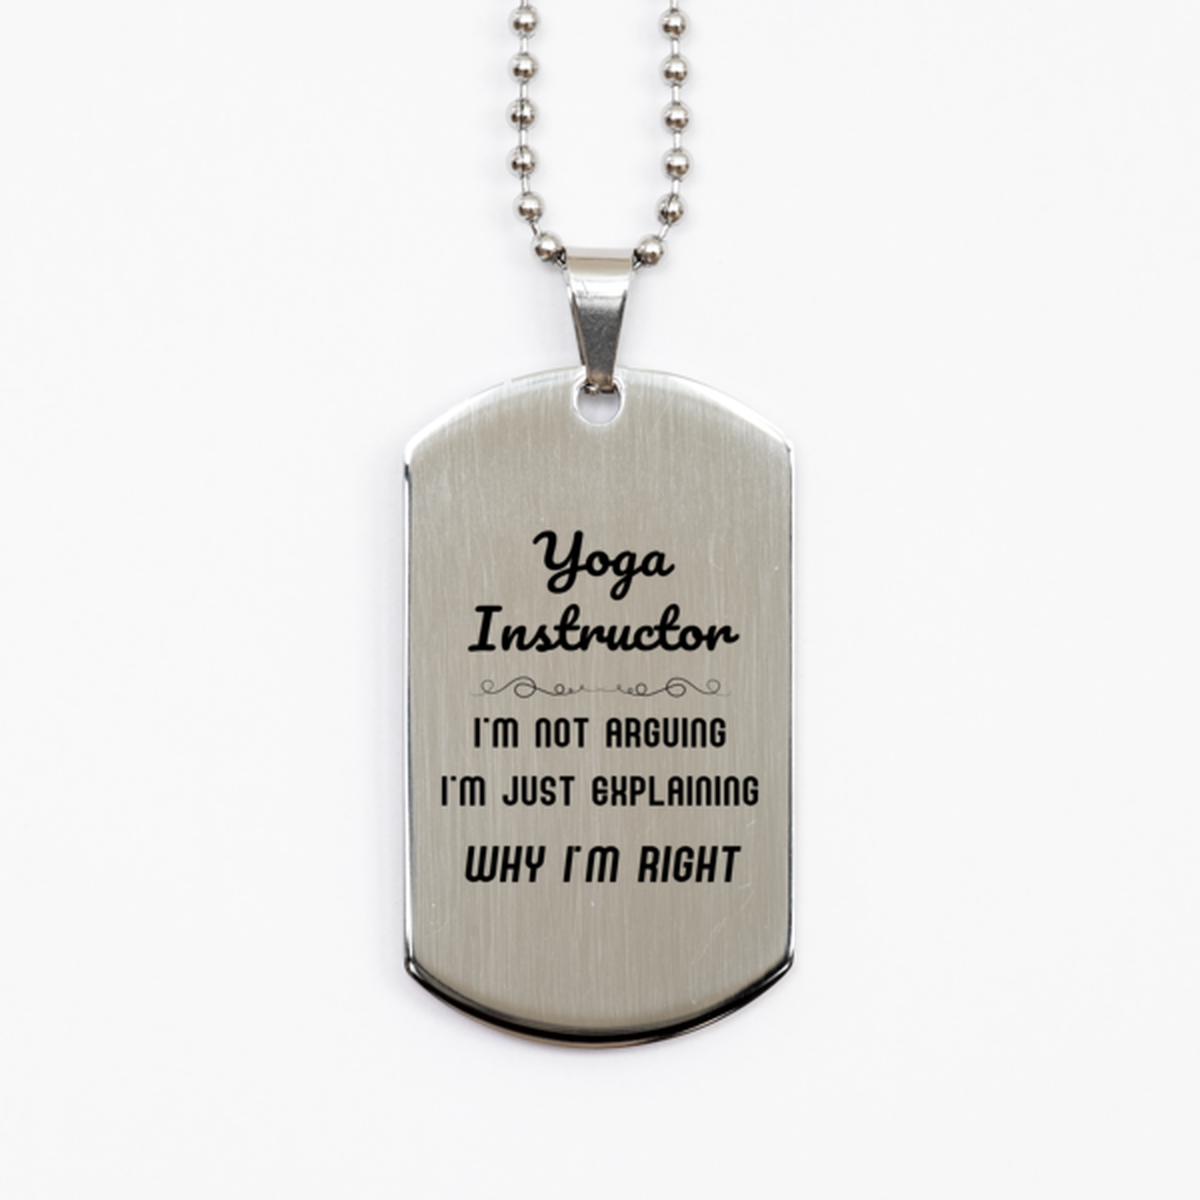 Yoga Instructor I'm not Arguing. I'm Just Explaining Why I'm RIGHT Silver Dog Tag, Funny Saying Quote Yoga Instructor Gifts For Yoga Instructor Graduation Birthday Christmas Gifts for Men Women Coworker